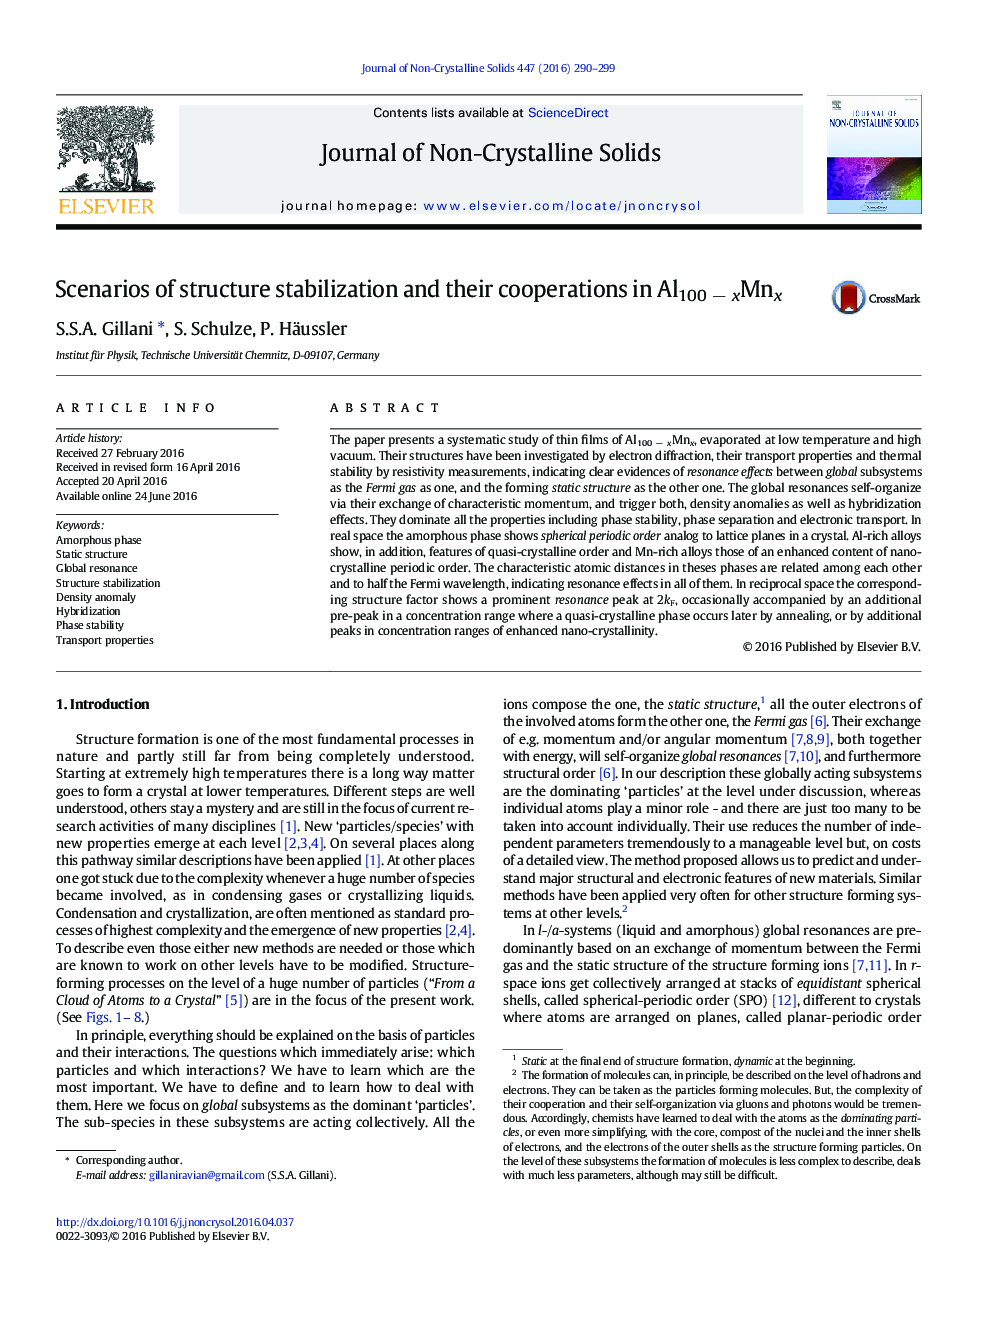 Scenarios of structure stabilization and their cooperations in Al100 − xMnx